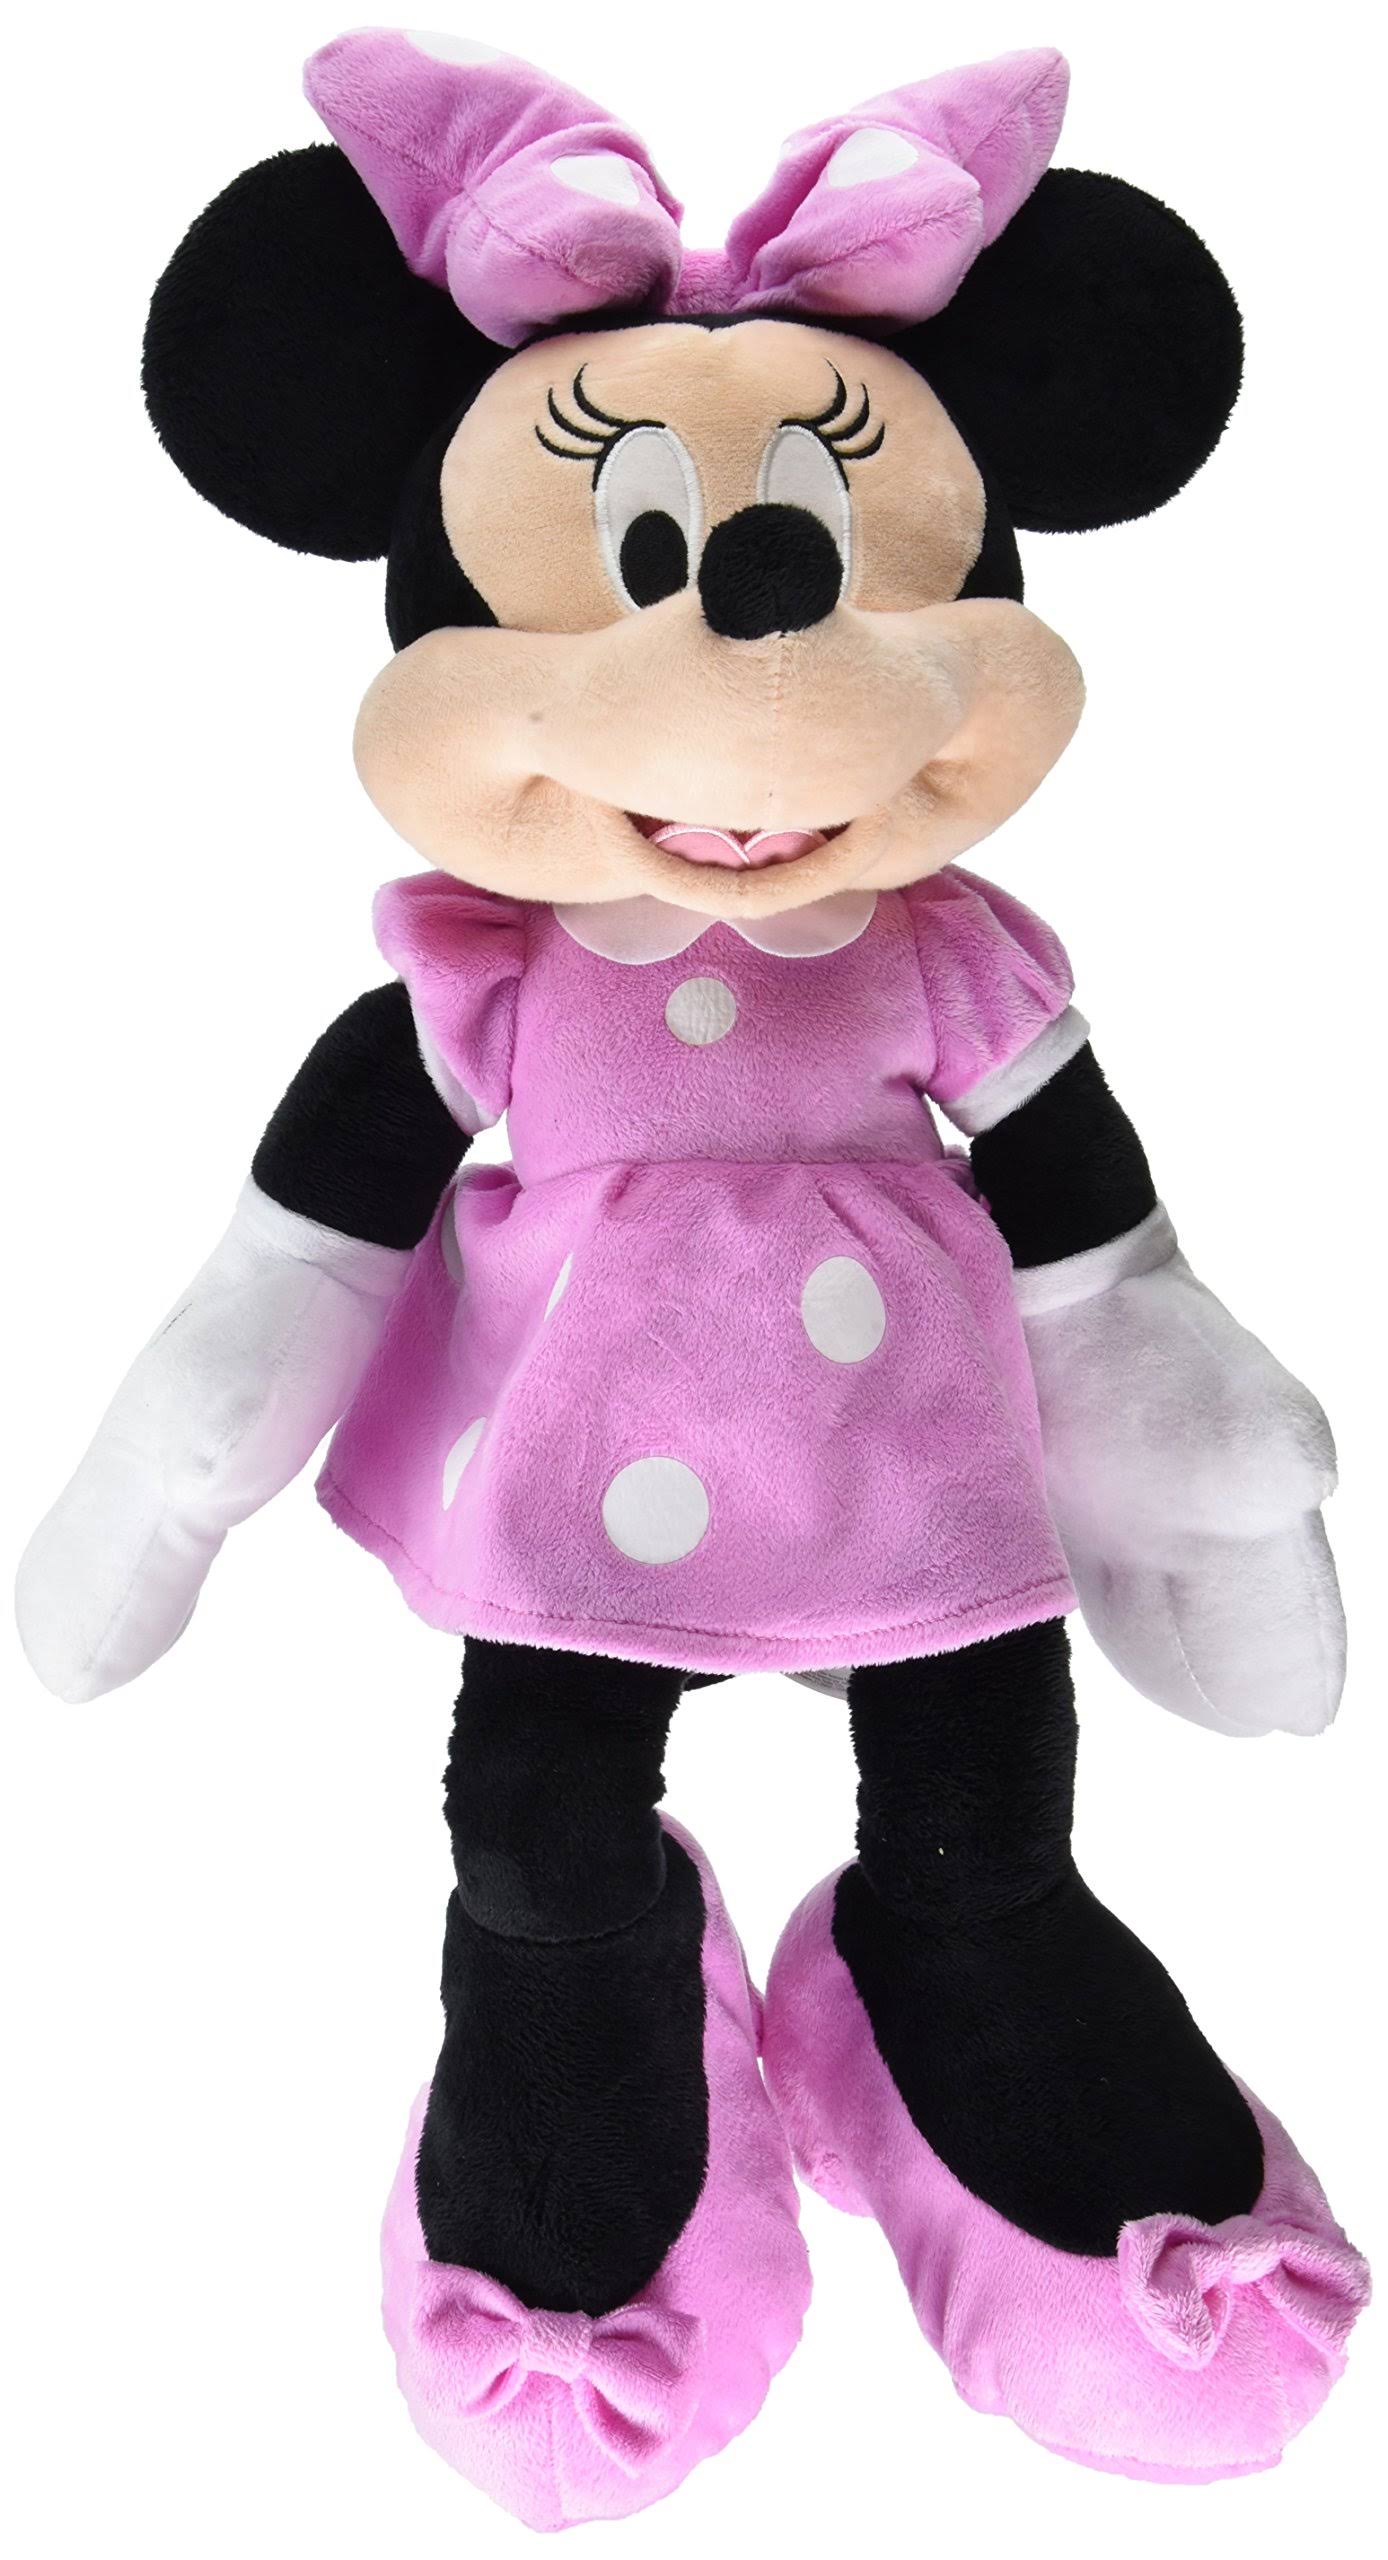 Disney Minnie Mouse Stuffed Toy - Pink, 25"